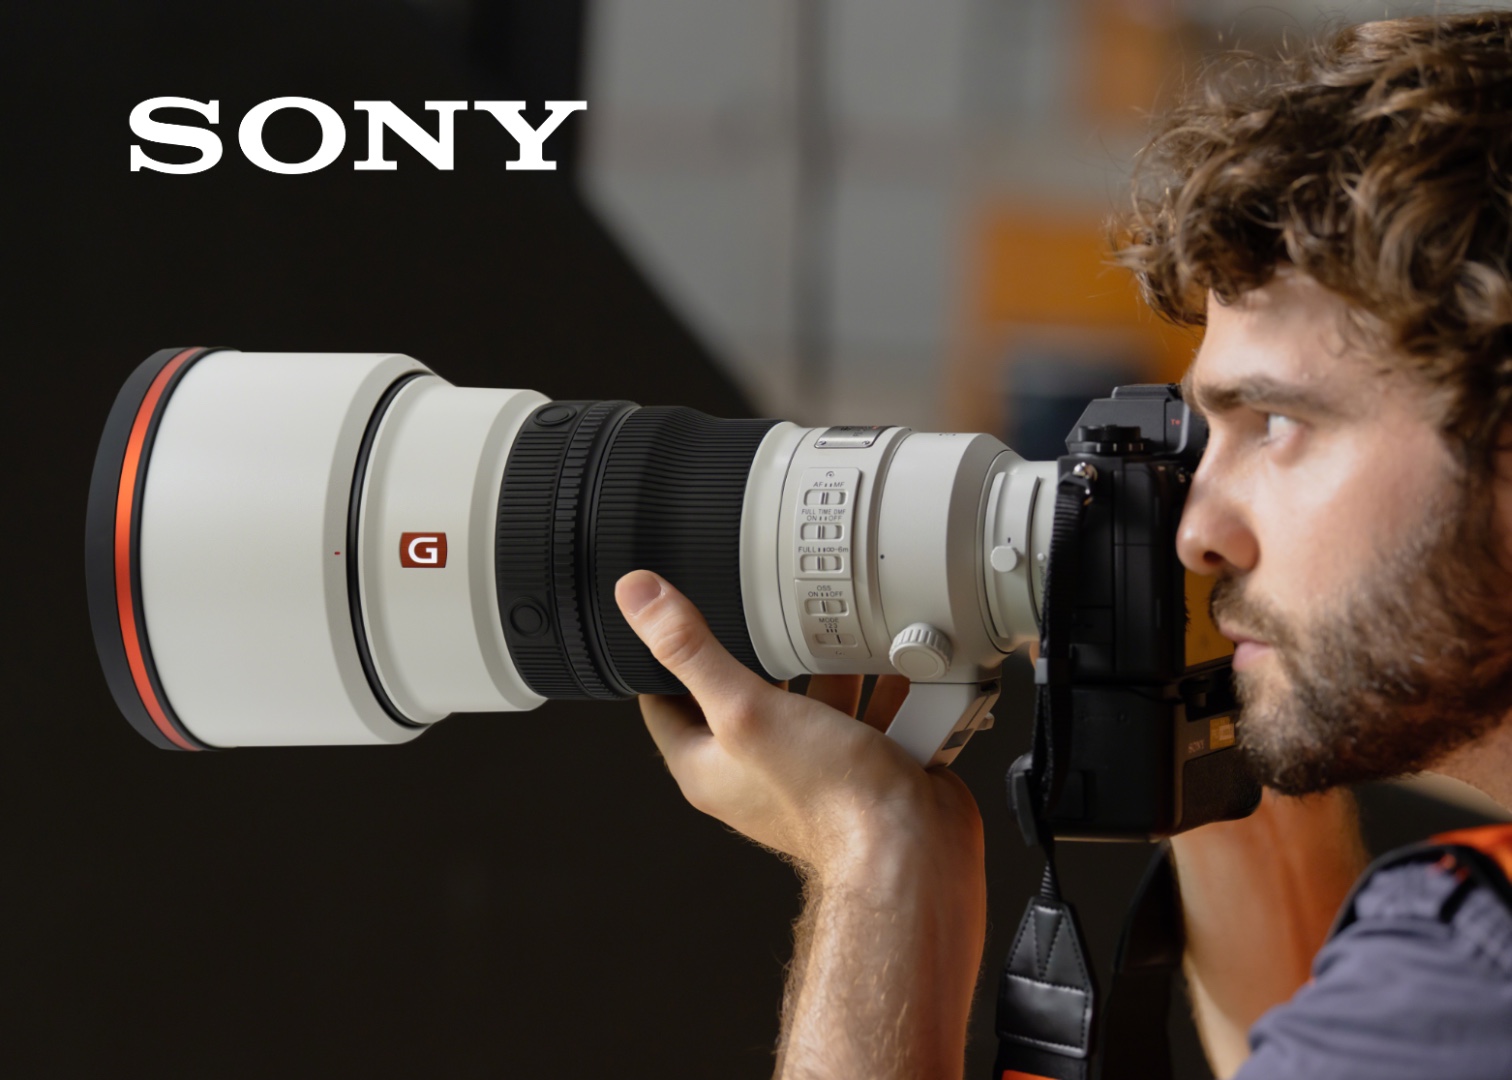 The new Sony 300mm f2.8 GM